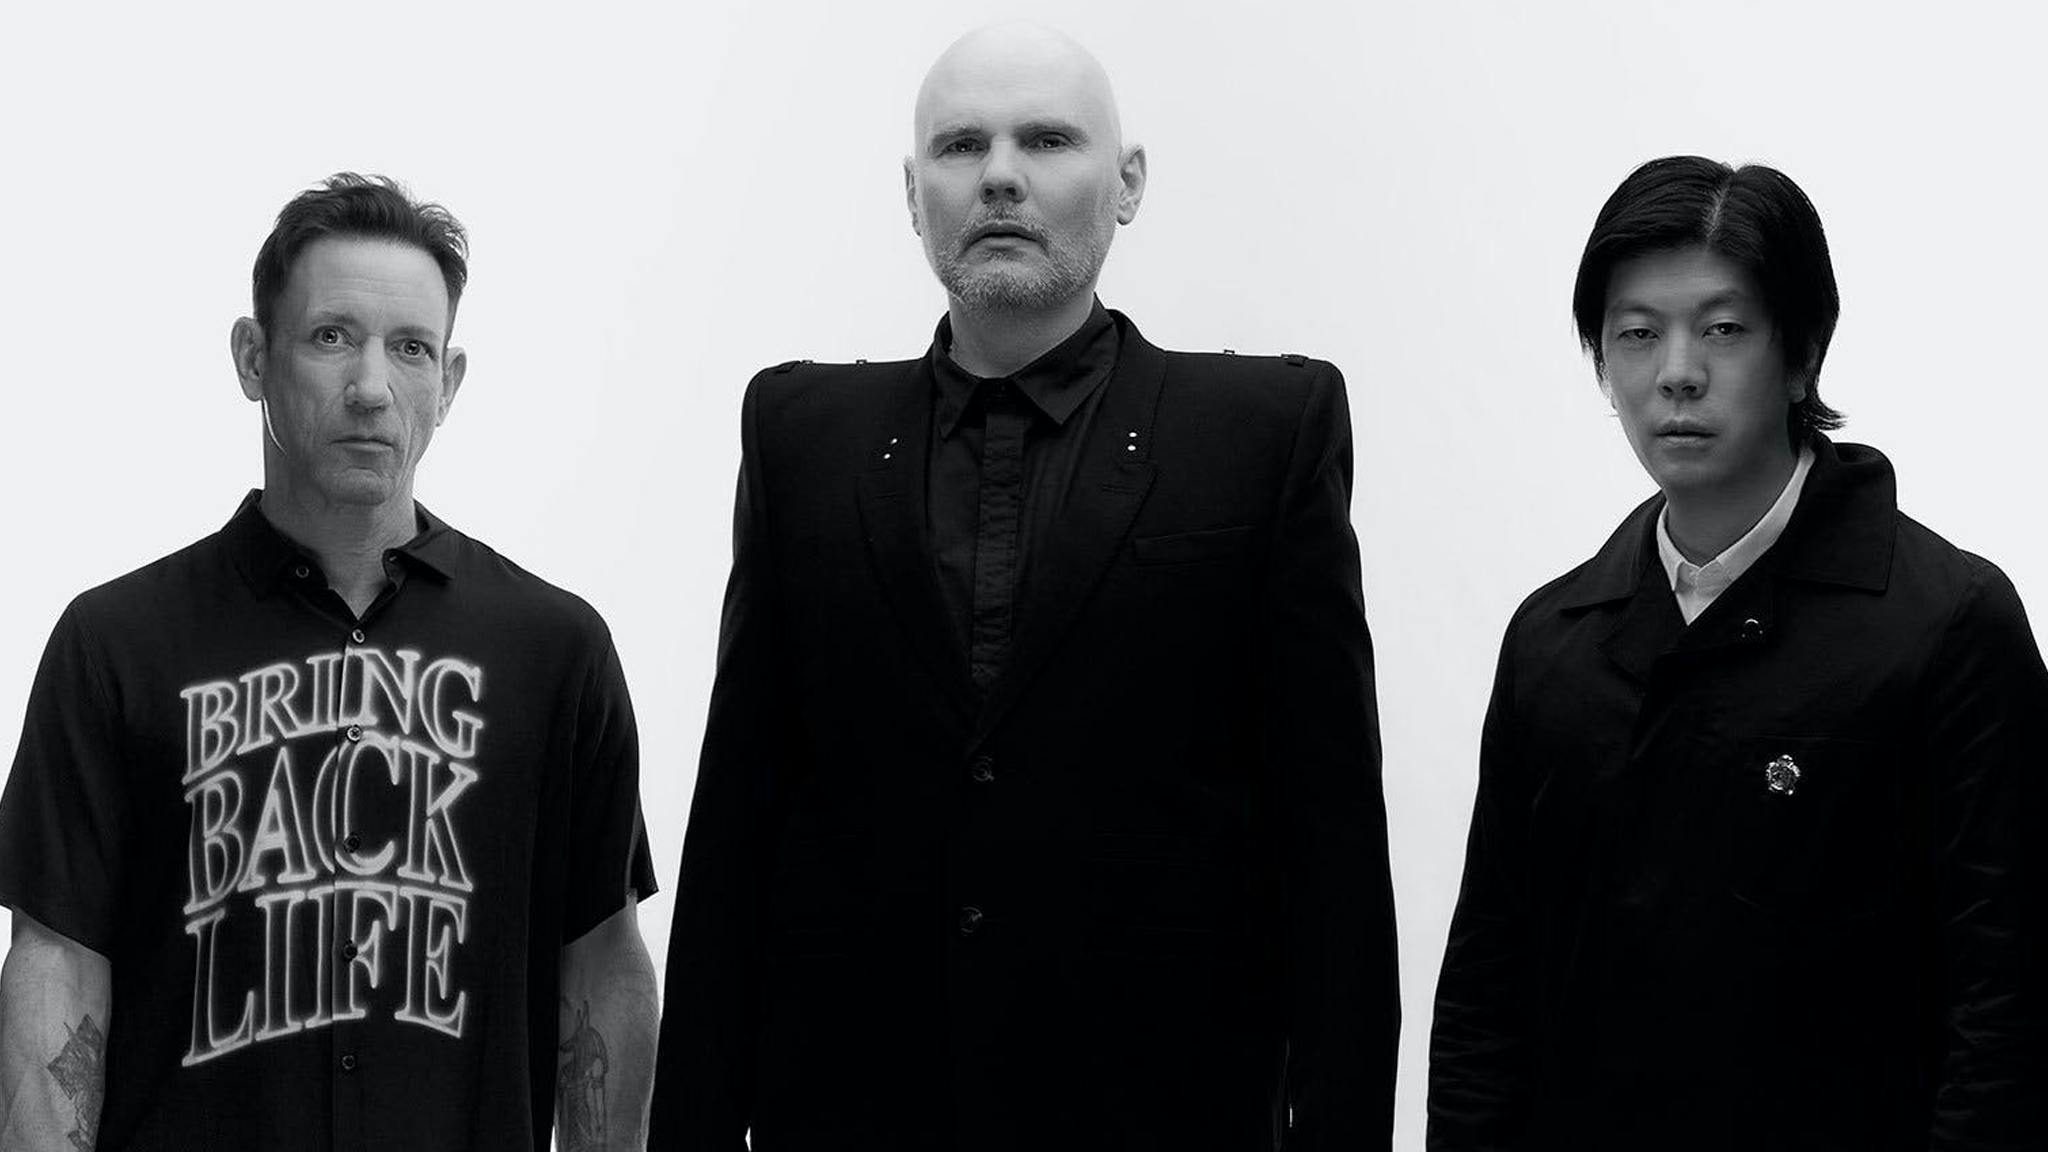 You can officially apply to be Smashing Pumpkins’ “additional” guitarist